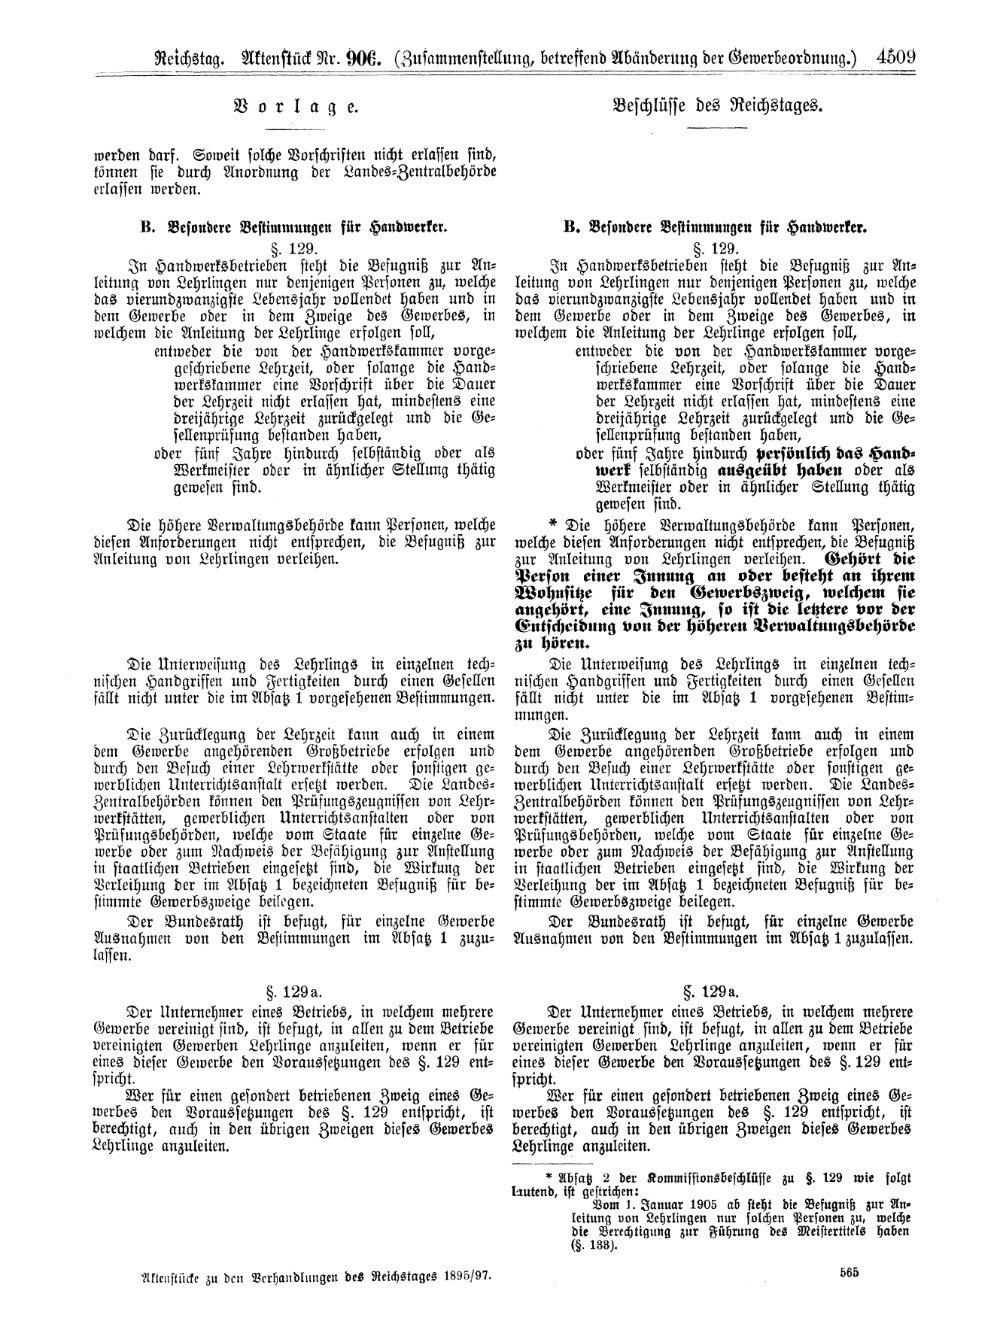 Scan of page 4509